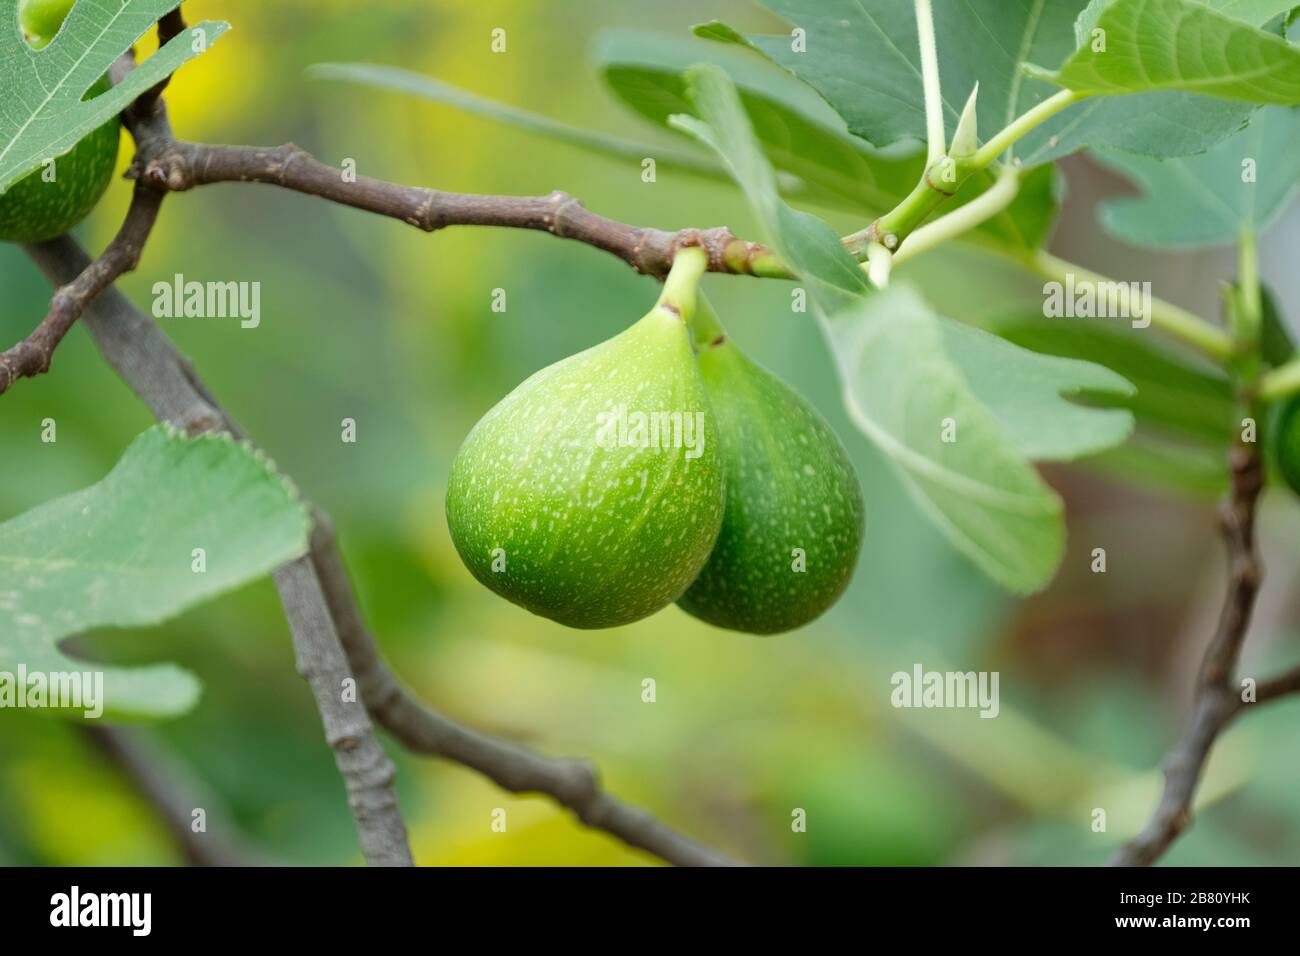 Ficus carica 'Excel', Fig excel. Developing fruit on a tree Stock Photo